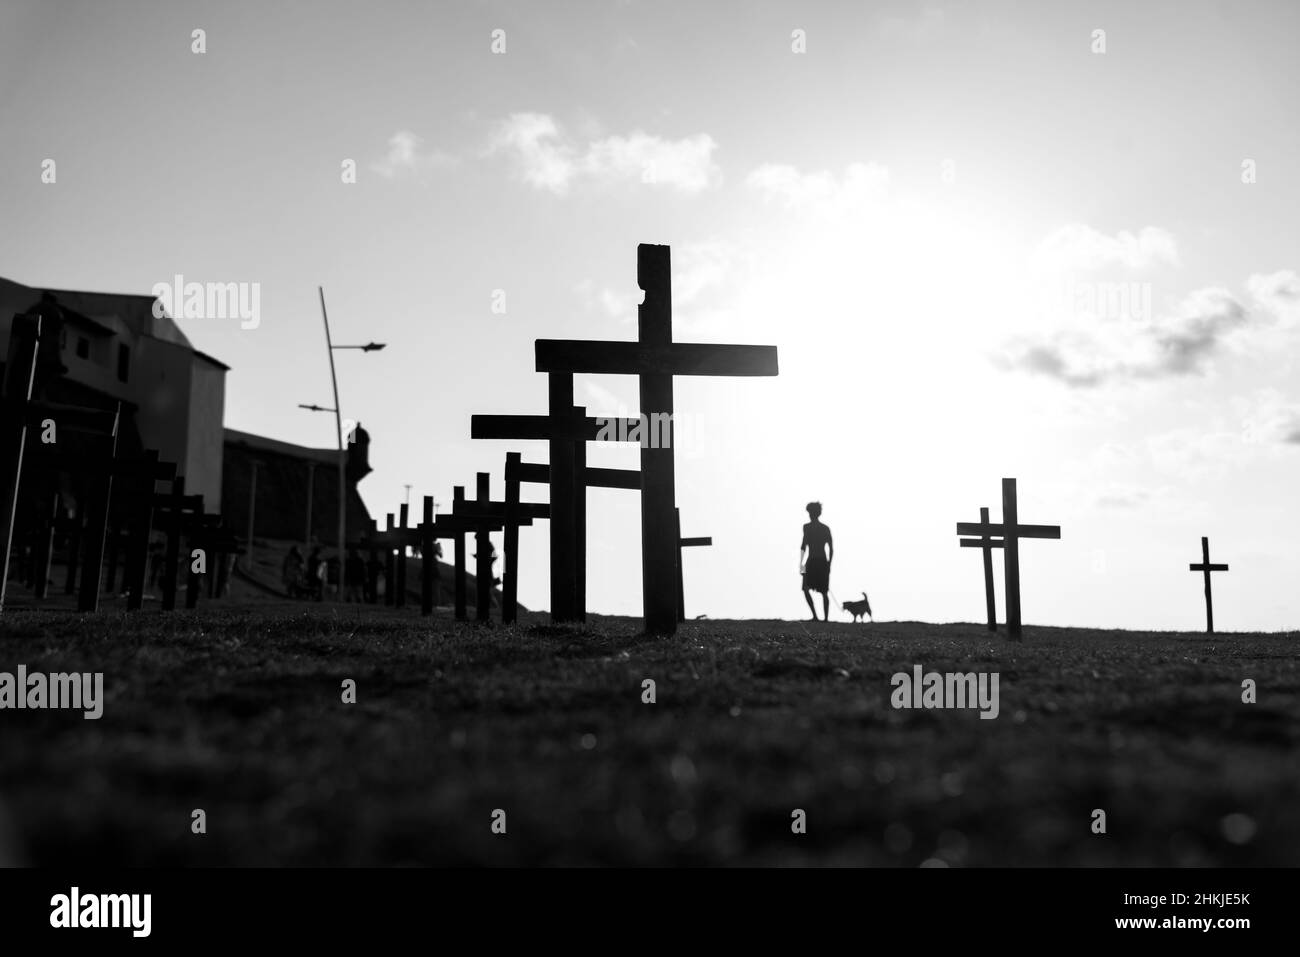 Crosses fixed to the ground in honor of those killed by Covid-19 at Farol da Barra in Salvador, Bahia, Brazil. Stock Photo